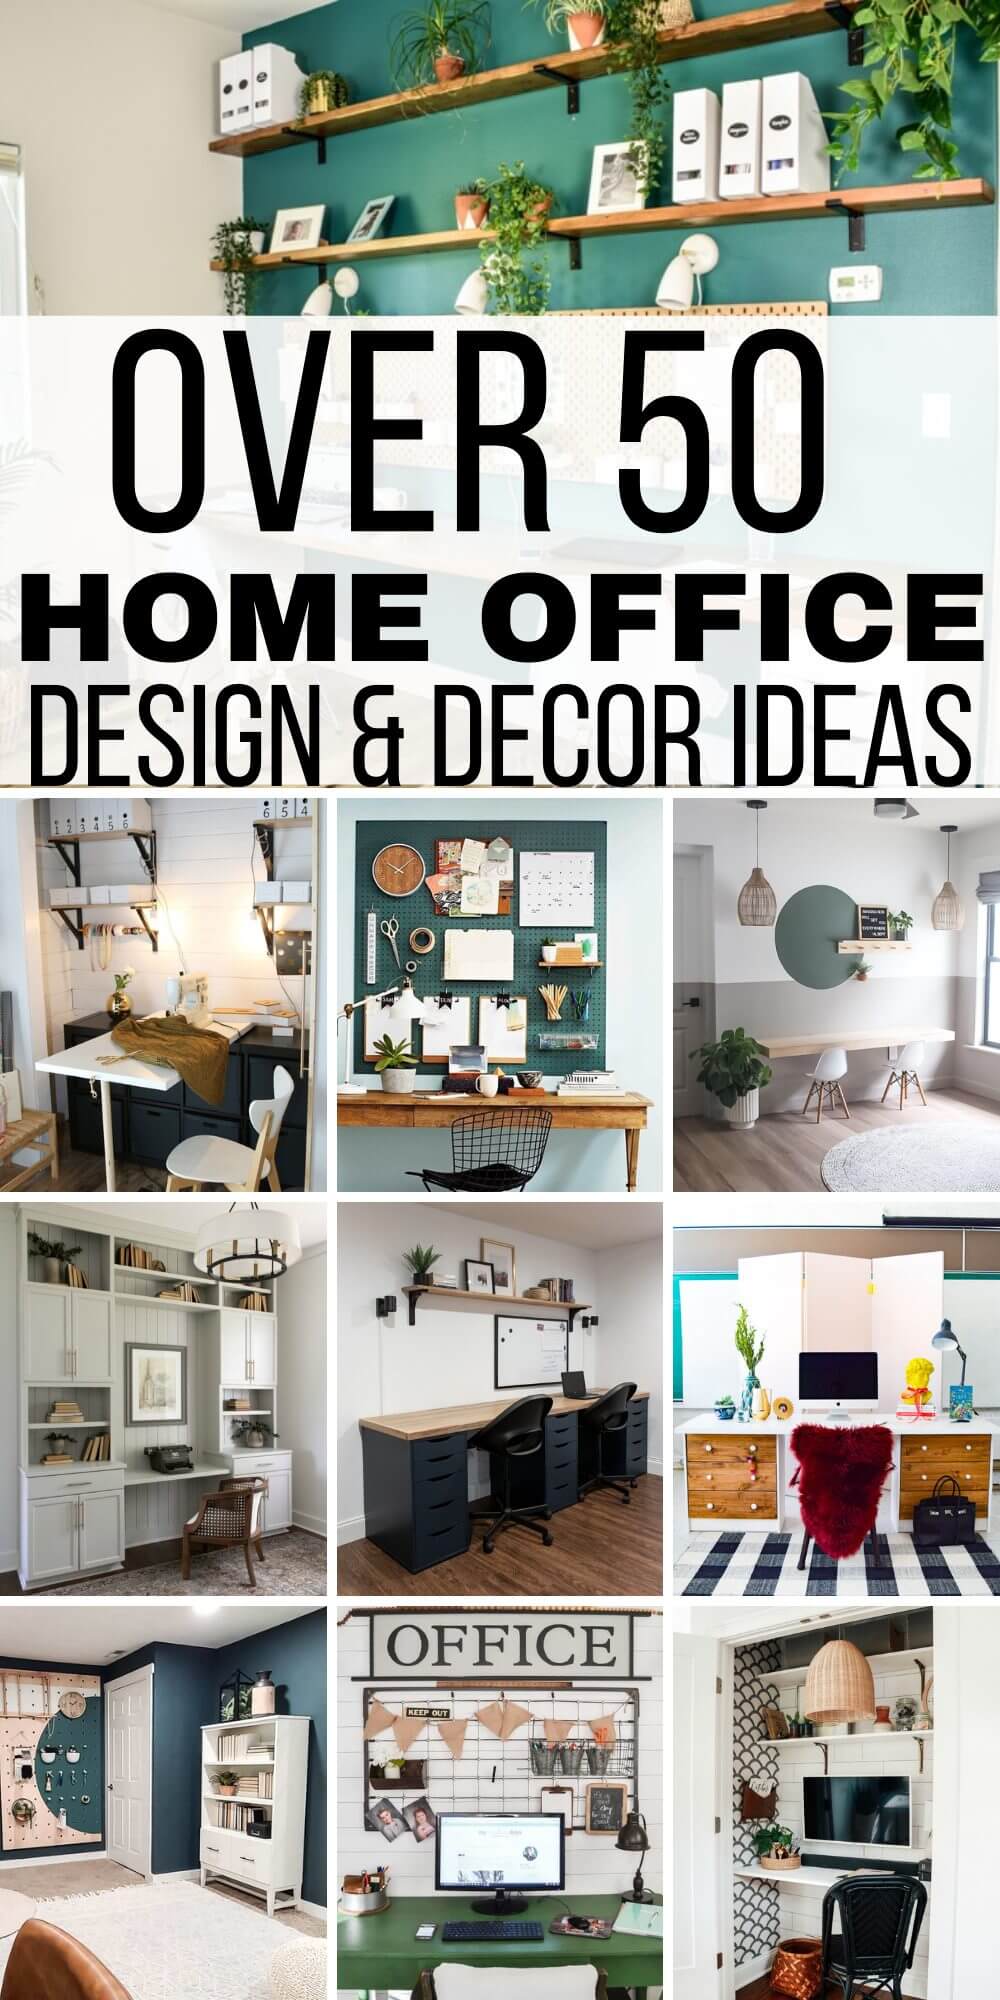 Over 50 Home Office Ideas to Make Your Work at Home Better!